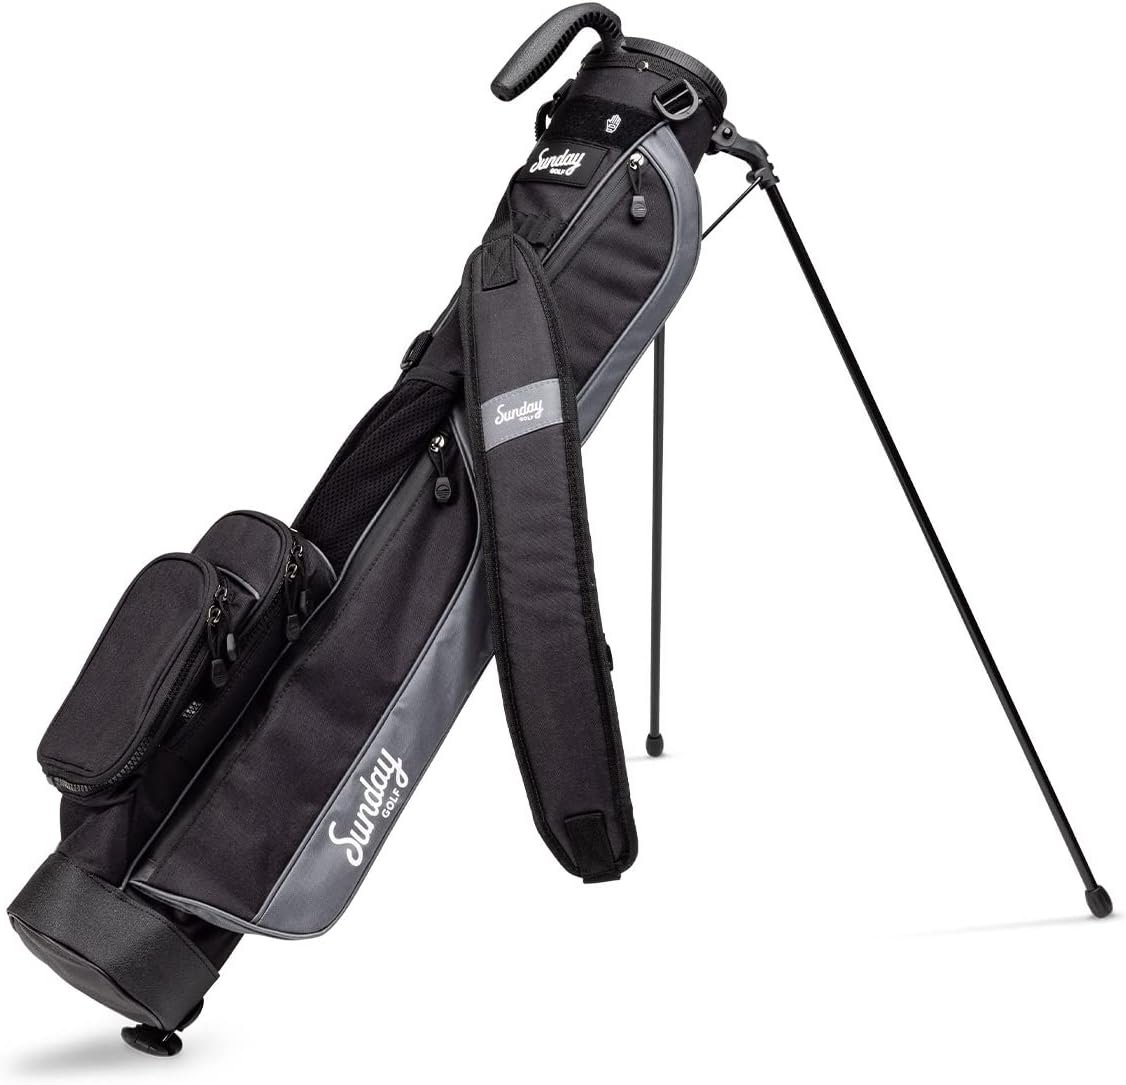 Sunday Golf Loma Bag - Lightweight Sunday Golf Bag with Strap and Stand – Easy to Carry Pitch n Putt Golf Bag – Golf Stand Bag for The Driving Range, Par 3 and Executive Courses, 31 Inches Tall